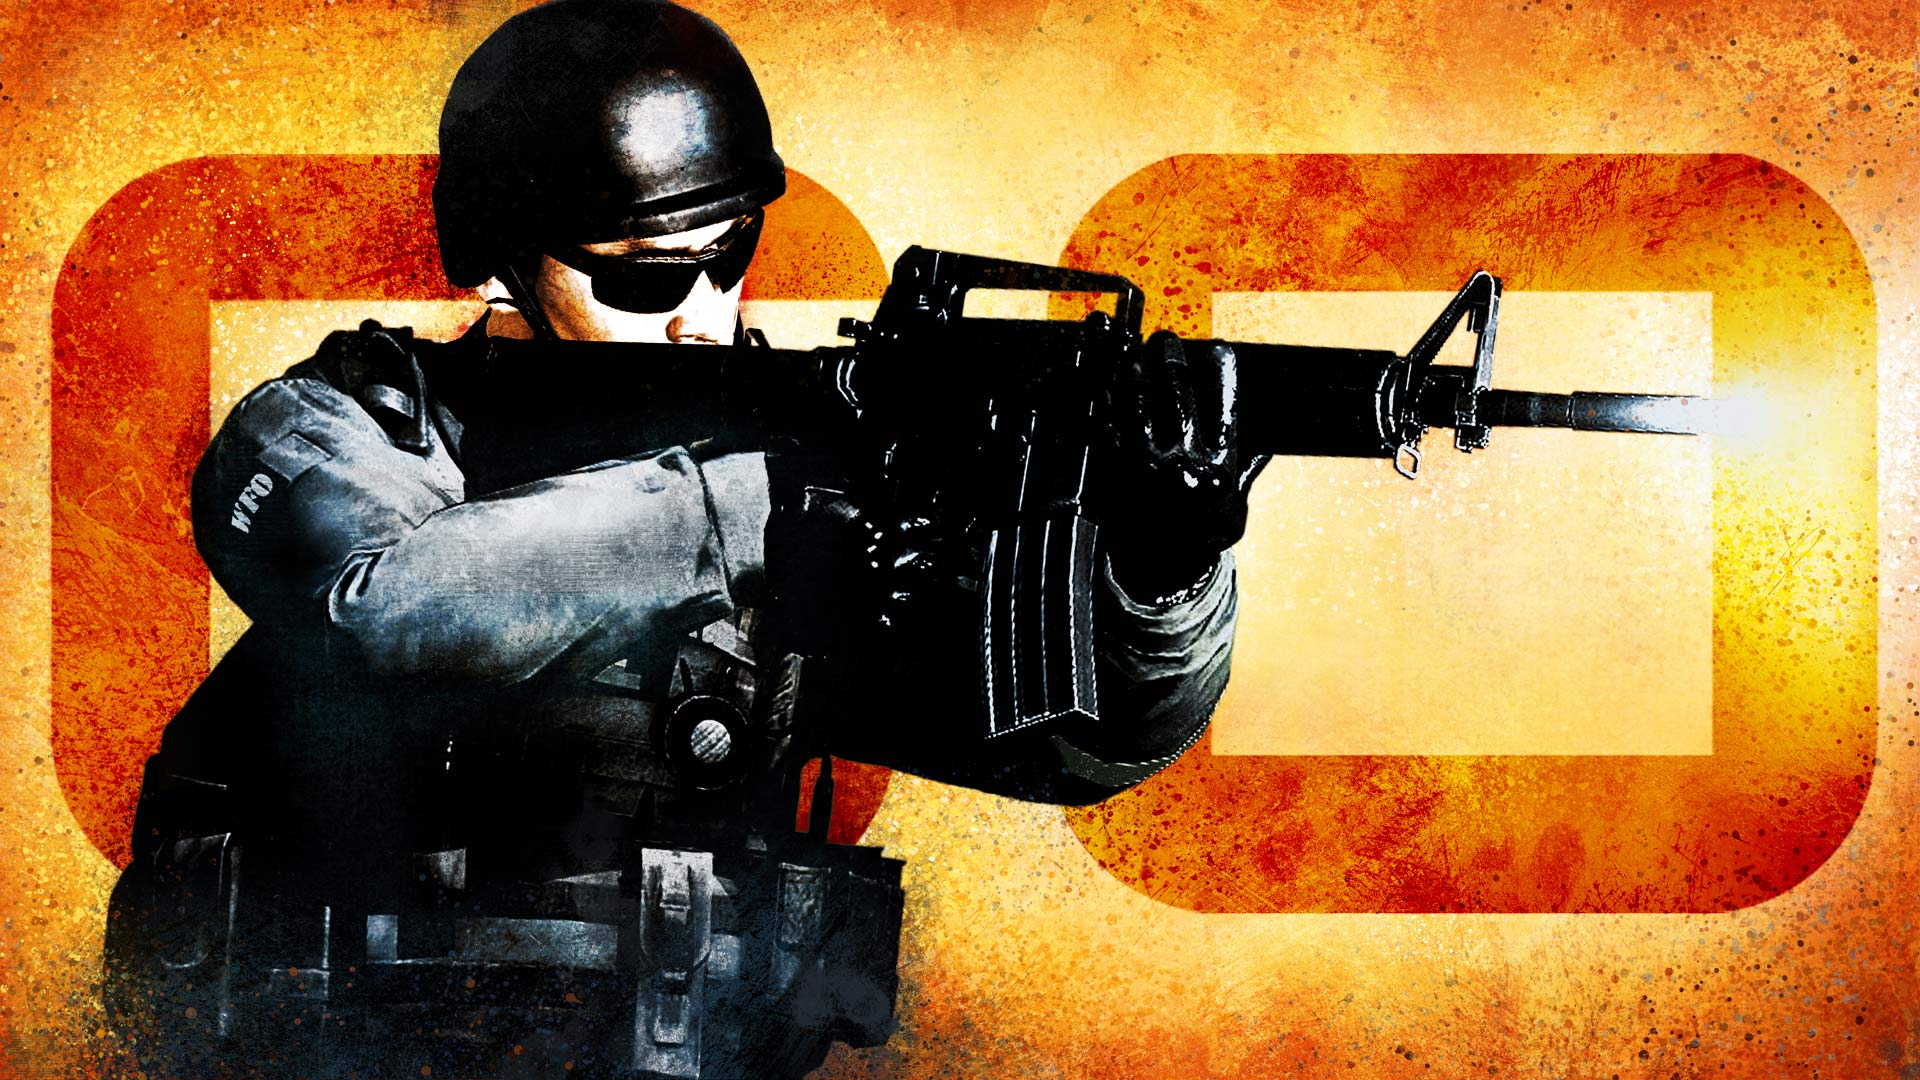 Wallpapers From Counter Strike Global Offensive Gamepressure Com